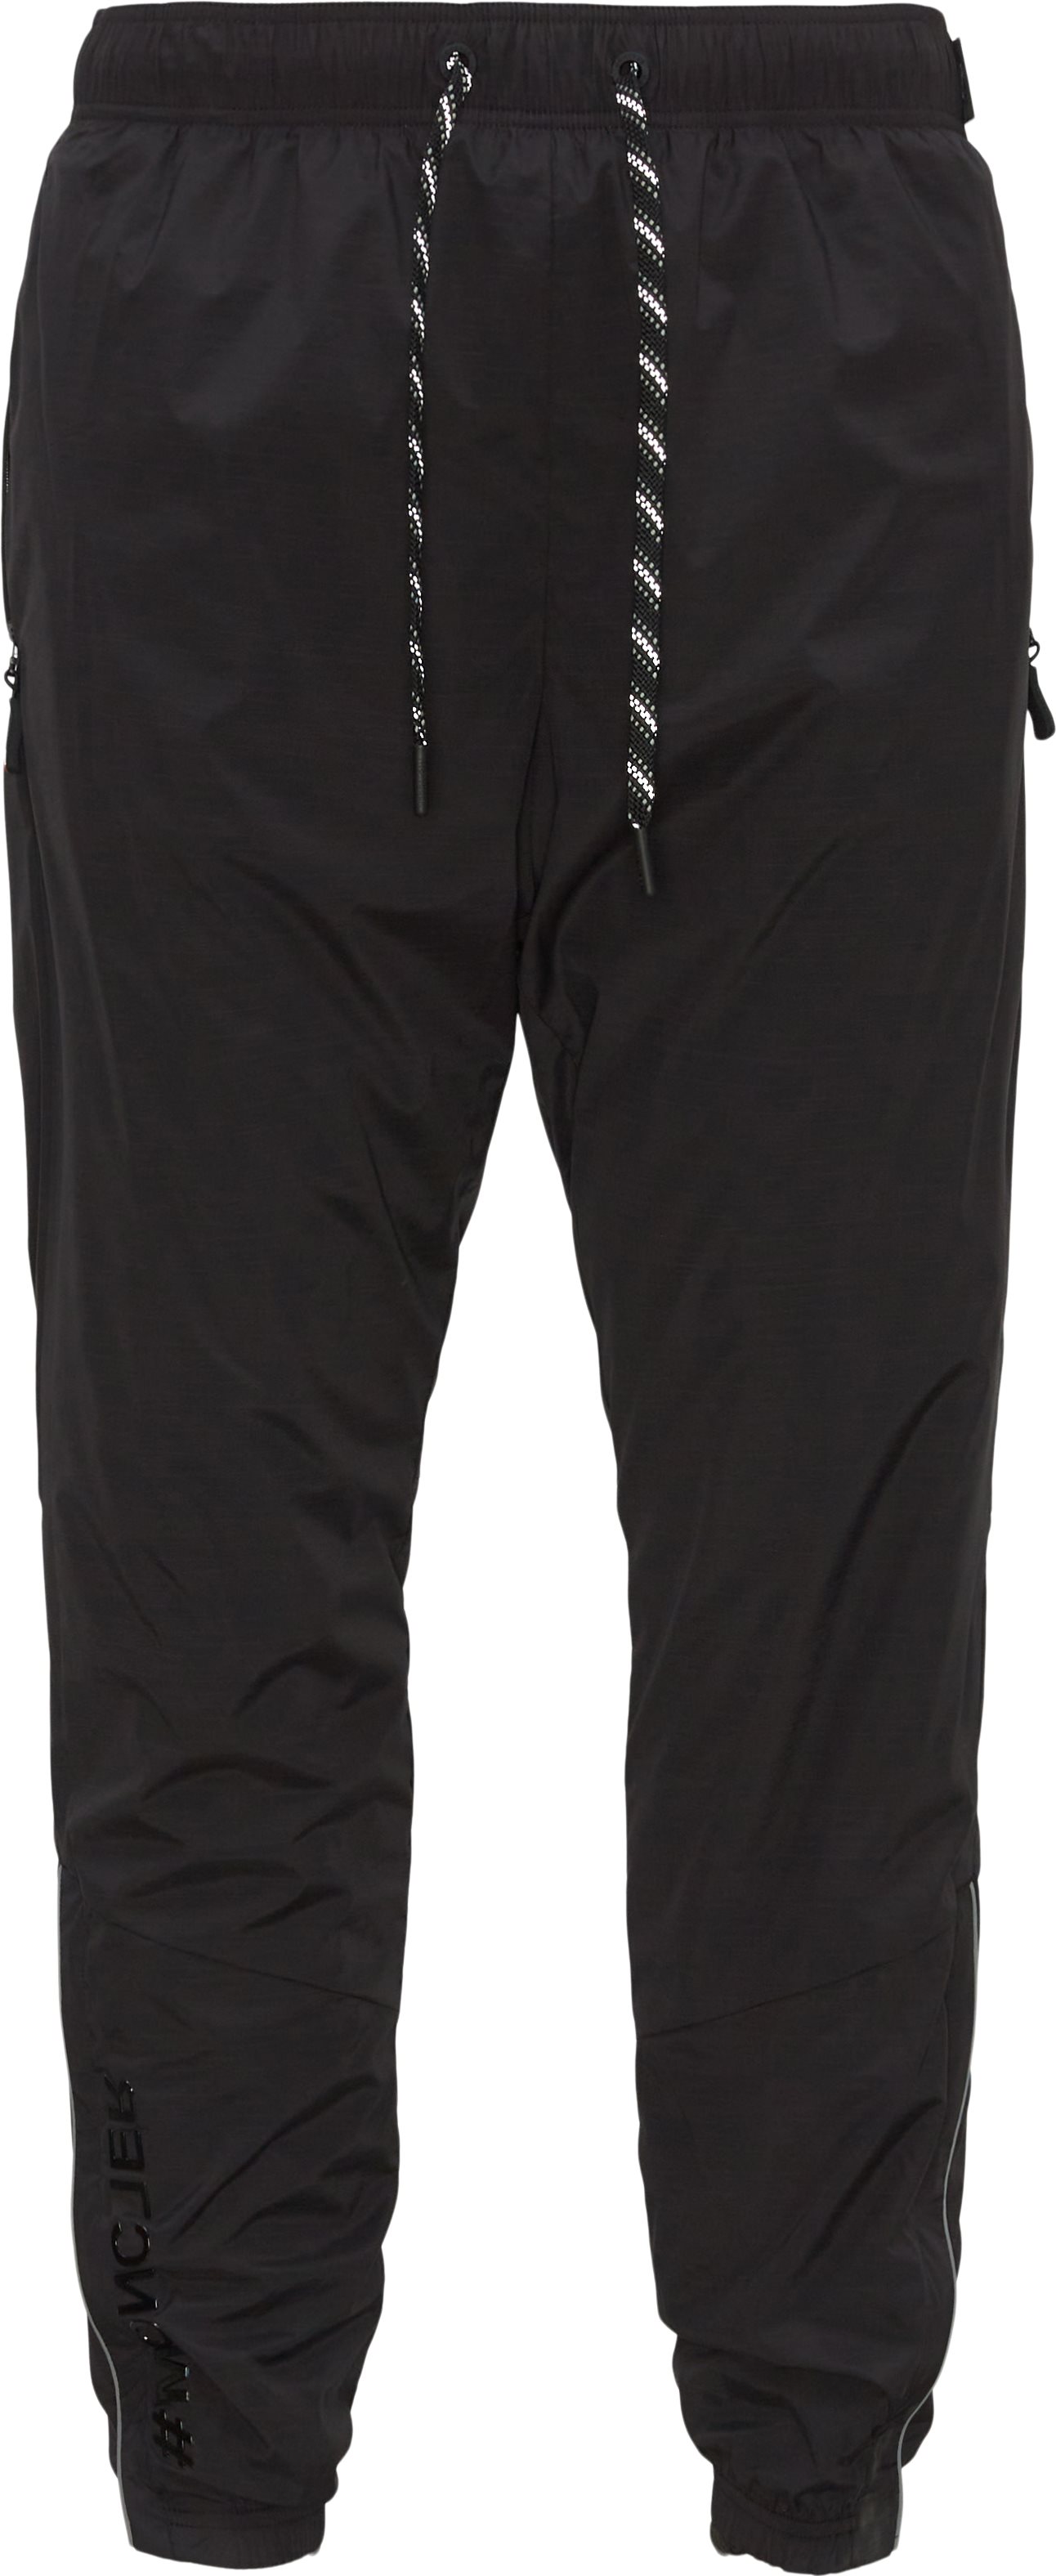 Moncler Grenoble Trousers 2A00002 596H5 Black